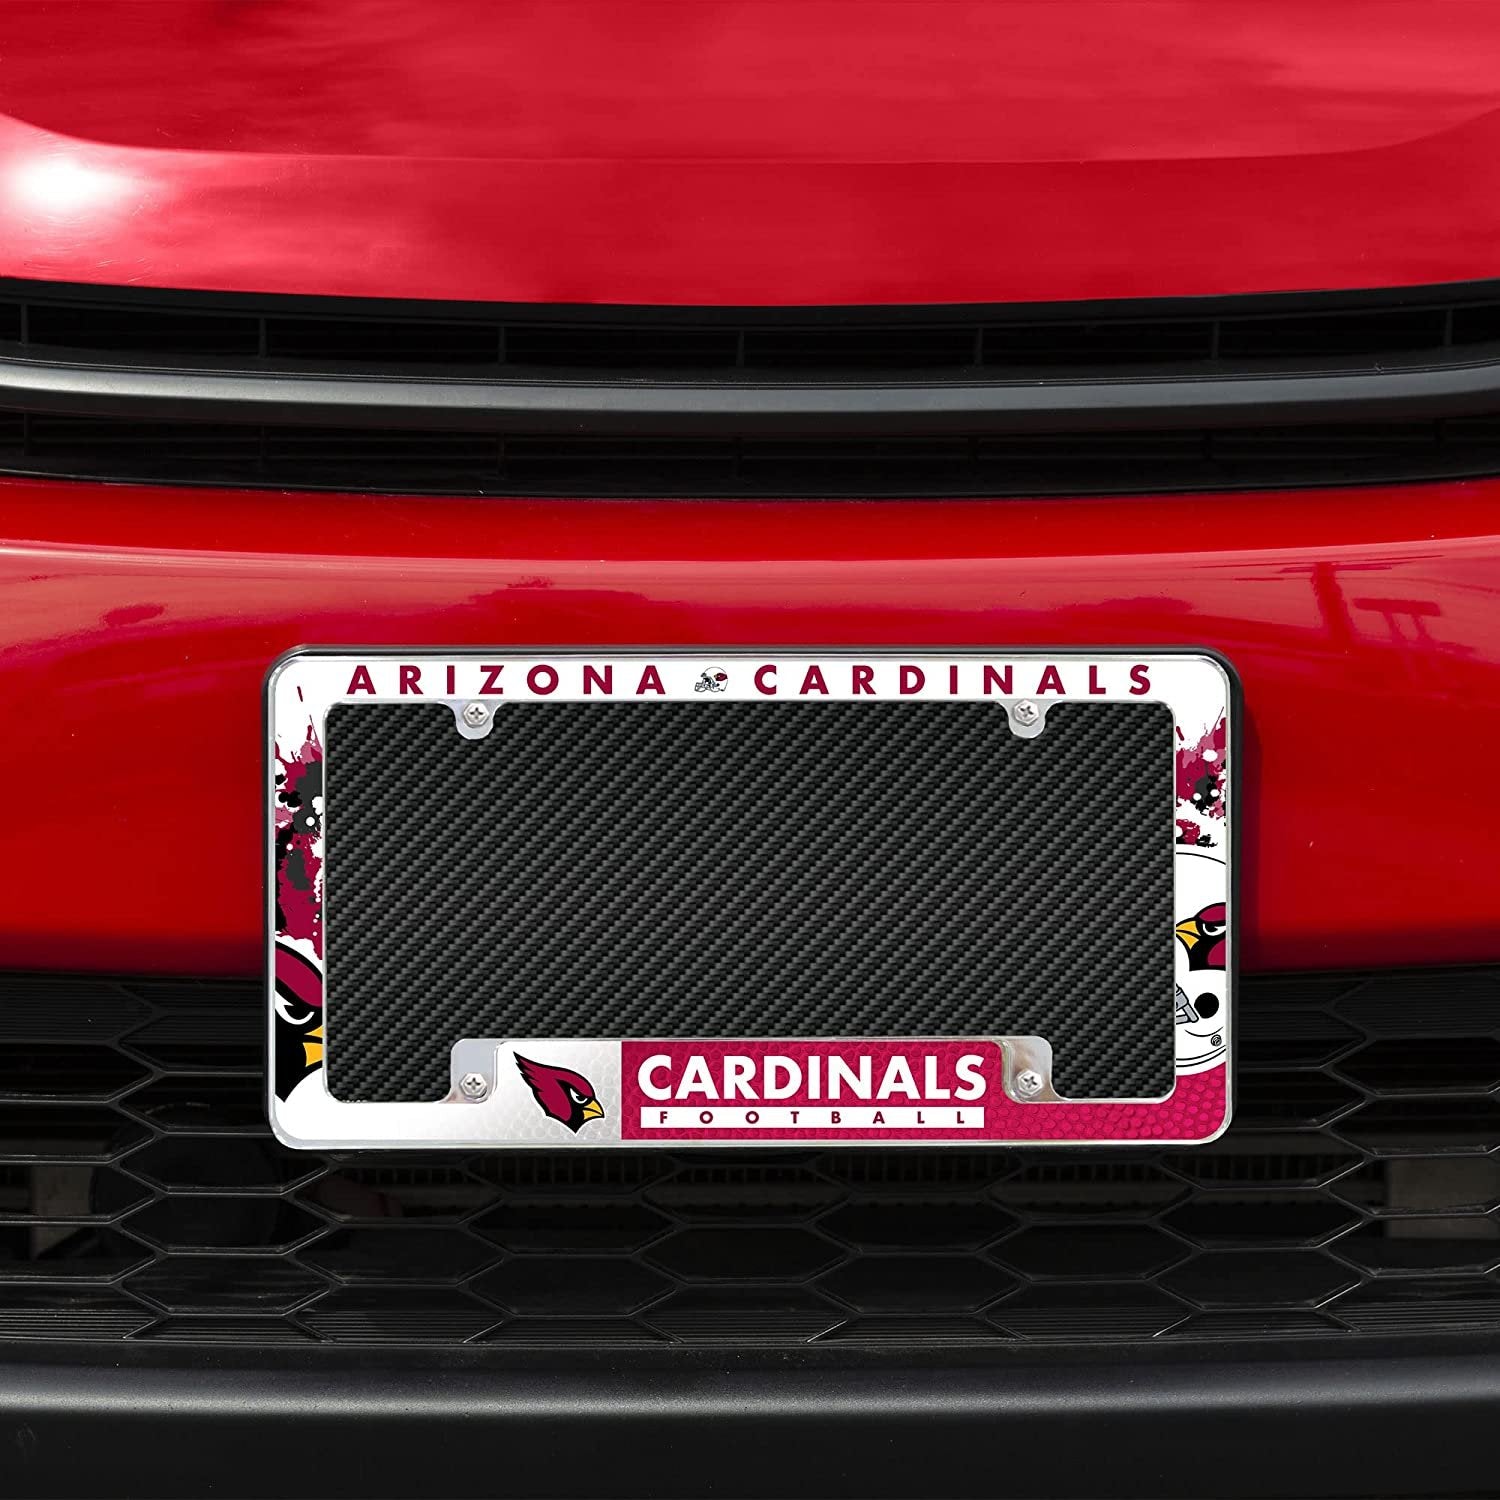 Arizona Cardinals Metal License License Plate Frame Tag Cover, All Over Design, 12x6 Inch